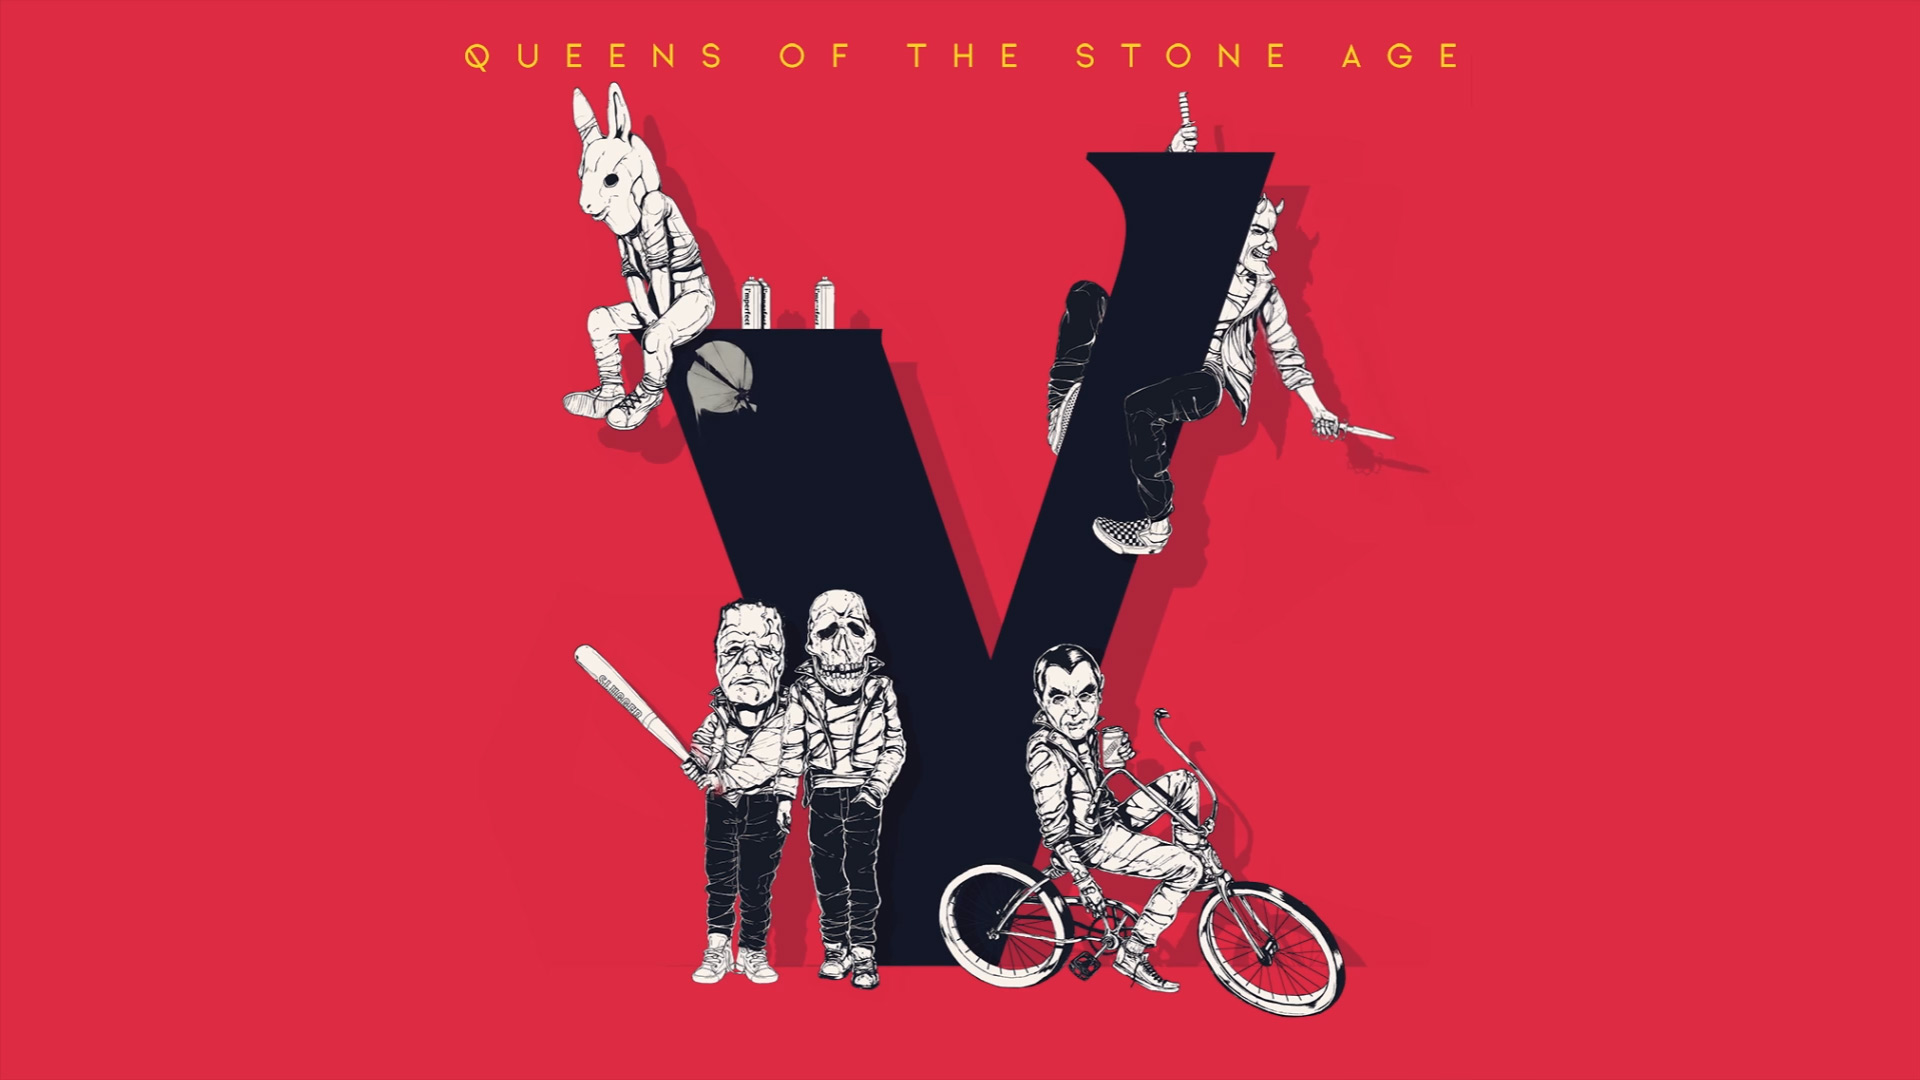 Queens of the Stone Age Wallpapers and Background Images - stmed.net